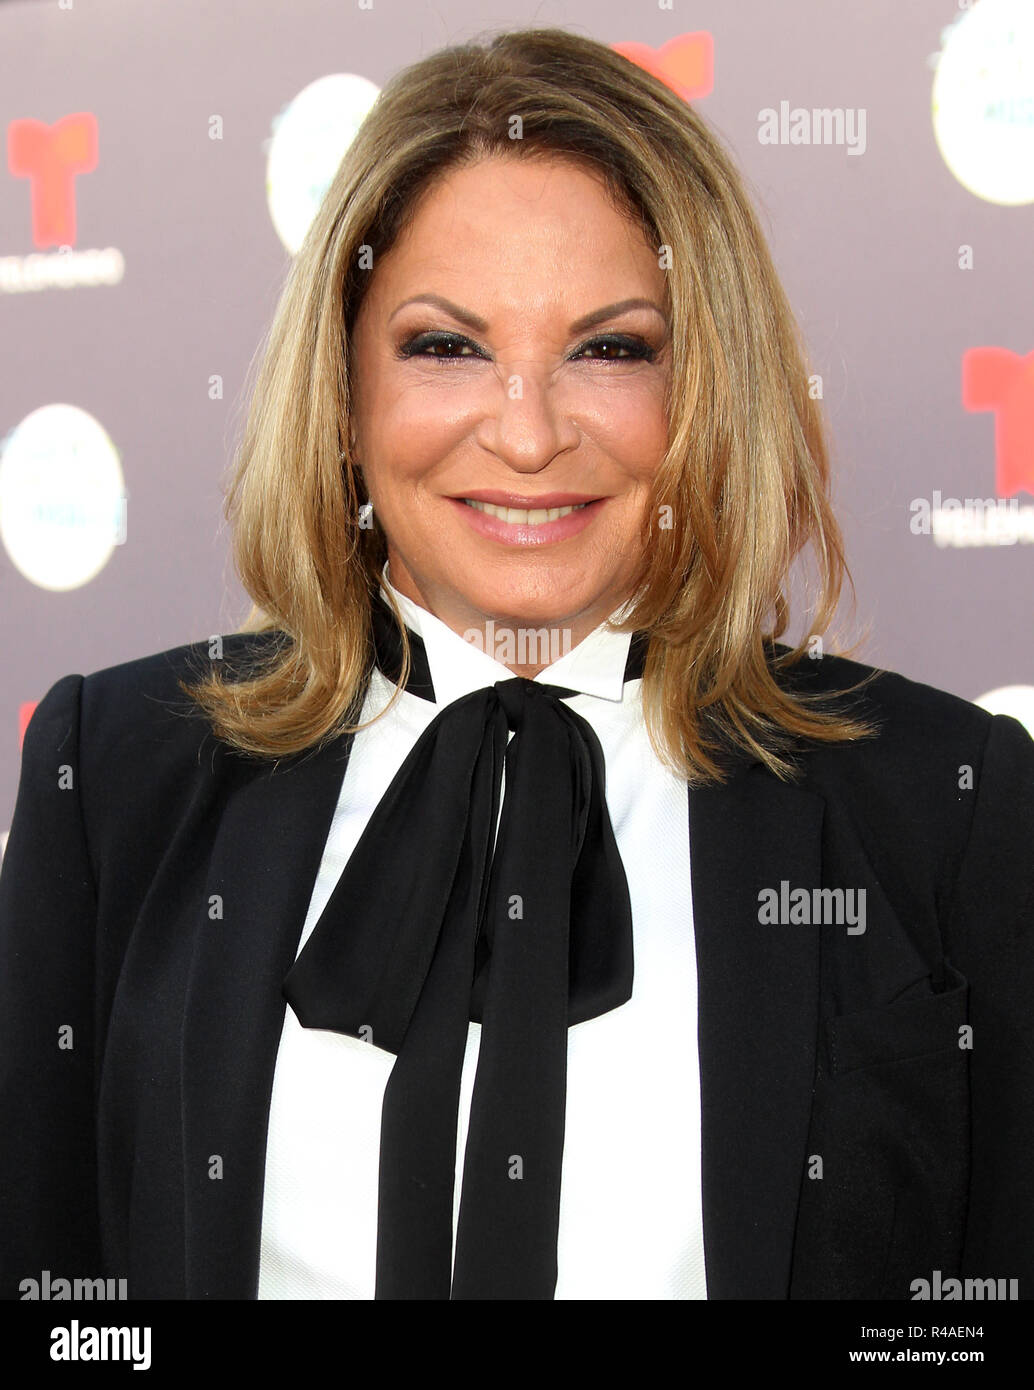 Latin American Music Awards 2018 held at the Dolby Theatre in Los Angeles, California.  Featuring: Doctora Ana Maria Polo Where: Los Angeles, California, United States When: 25 Oct 2018 Credit: Adriana M. Barraza/WENN.com Stock Photo